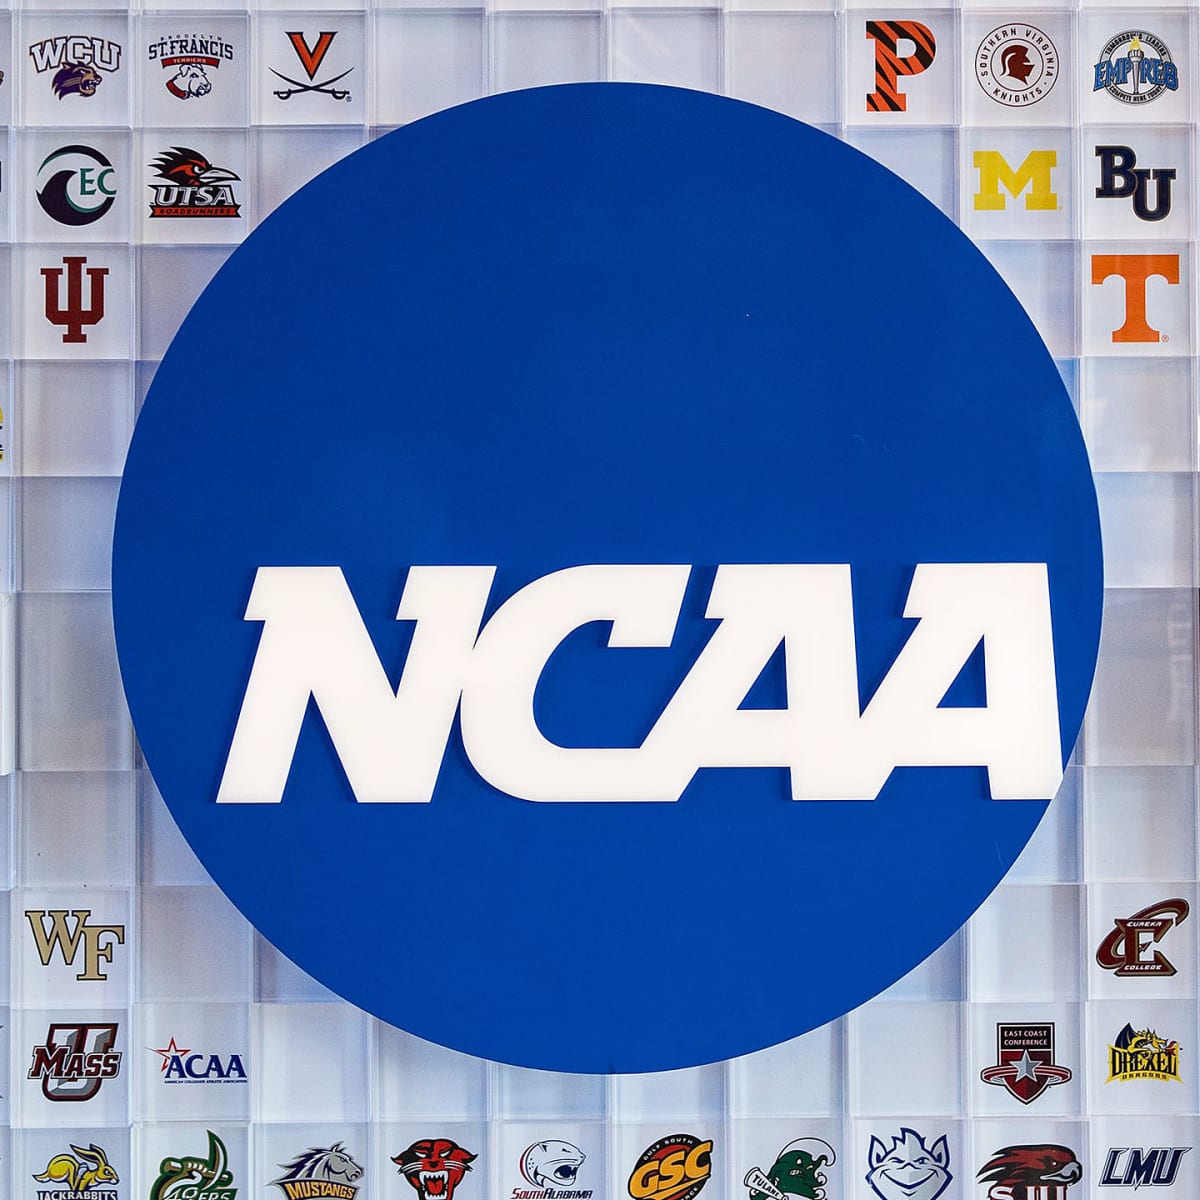 NCAA criticized for treatment of womens volleyball tournament